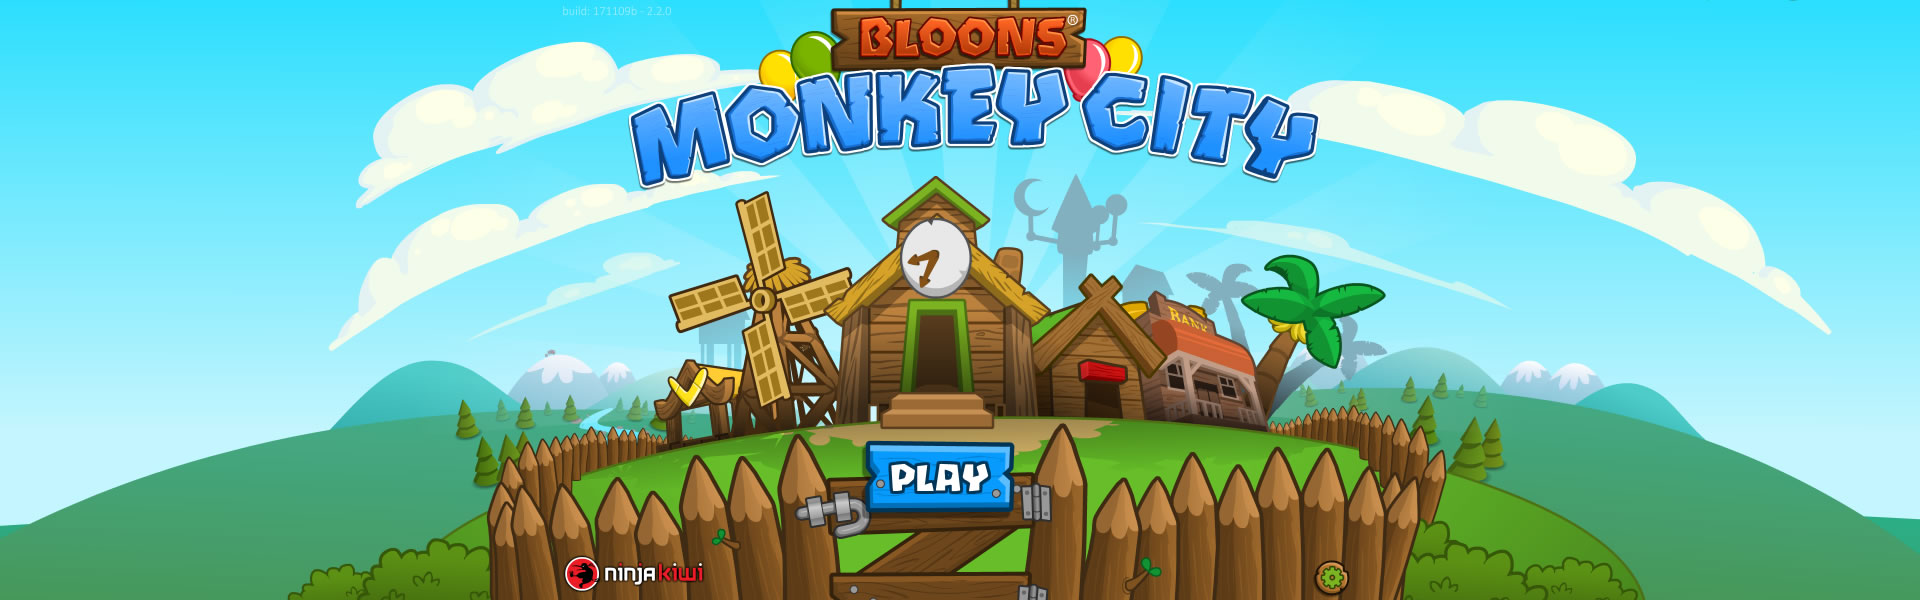 Bloons Monkey City: Build and expand your own monkey city while defending it from waves of bloons in this unique combination of tower defense and city building.
Kingdom Rush: Command your armies and defend your kingdom against hordes of enemies in this highly acclaimed tower defense game.